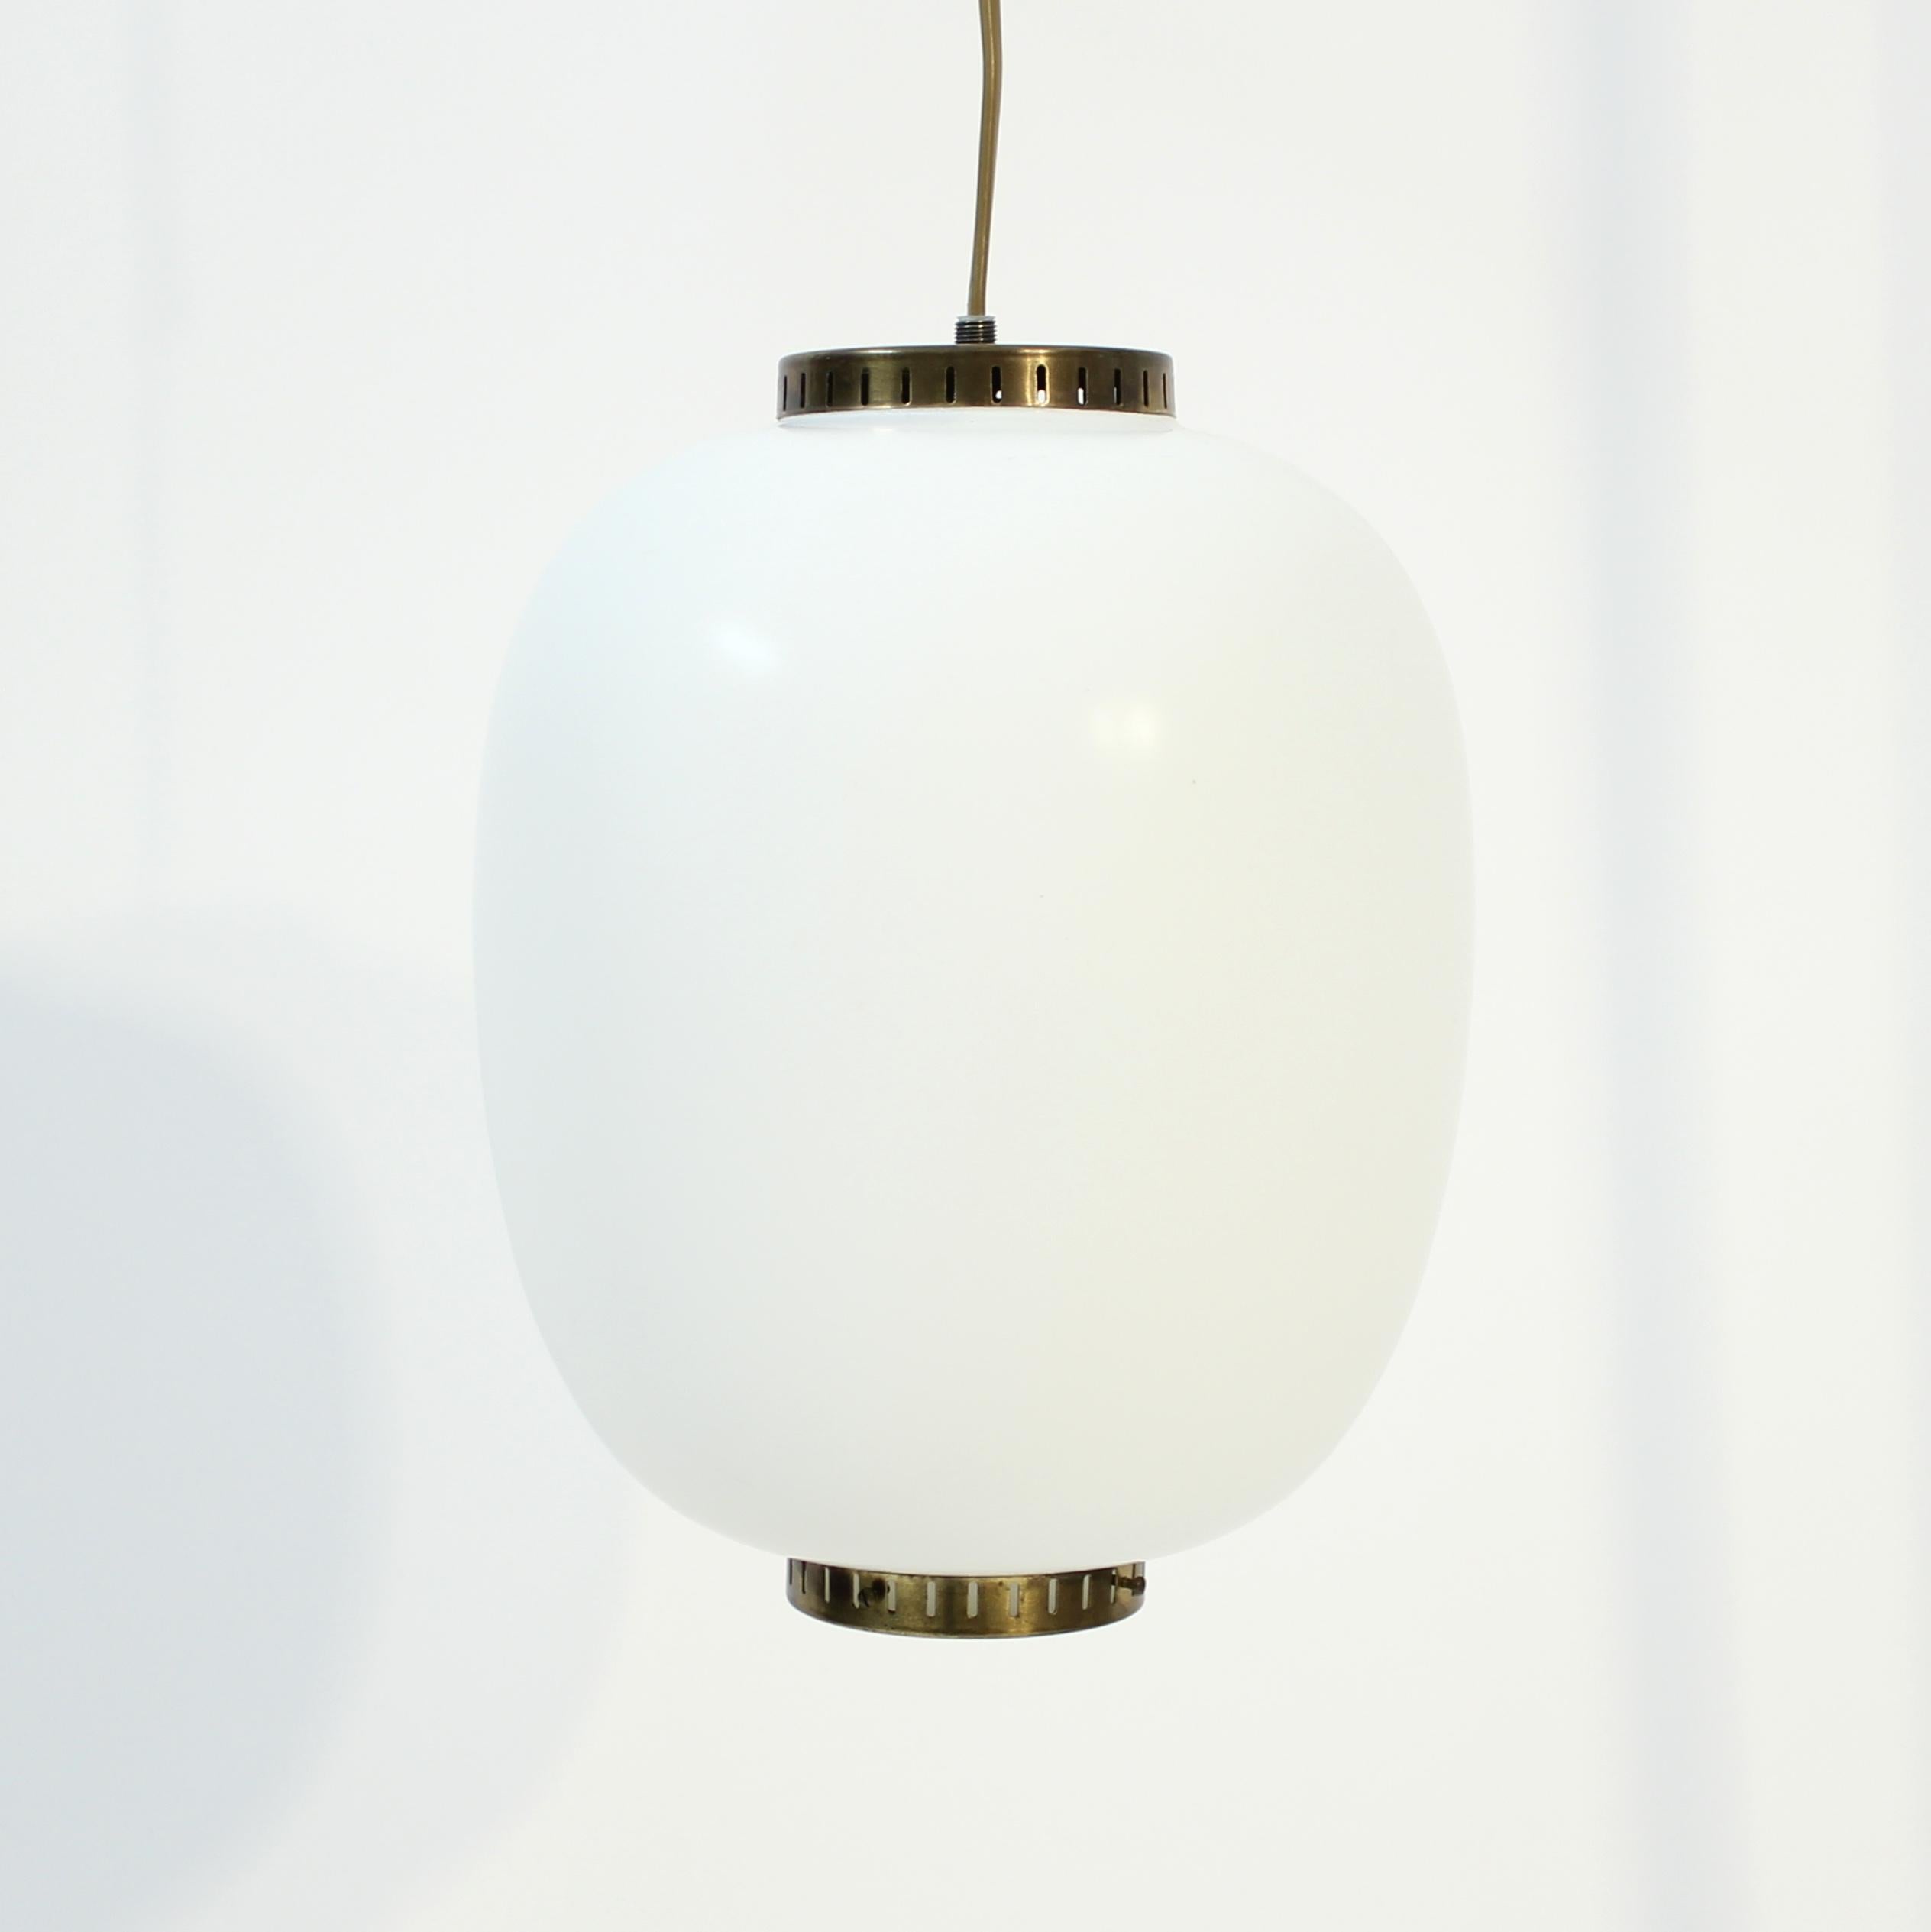 Ceiling lamp, model Kina (China in English), designed by Danish designer Bent Karlby for LYFA in the 1960s. Oval shaped opaline glass shade with brass details on the top and bottom. Very good and honest vintage condition with light ware and patina